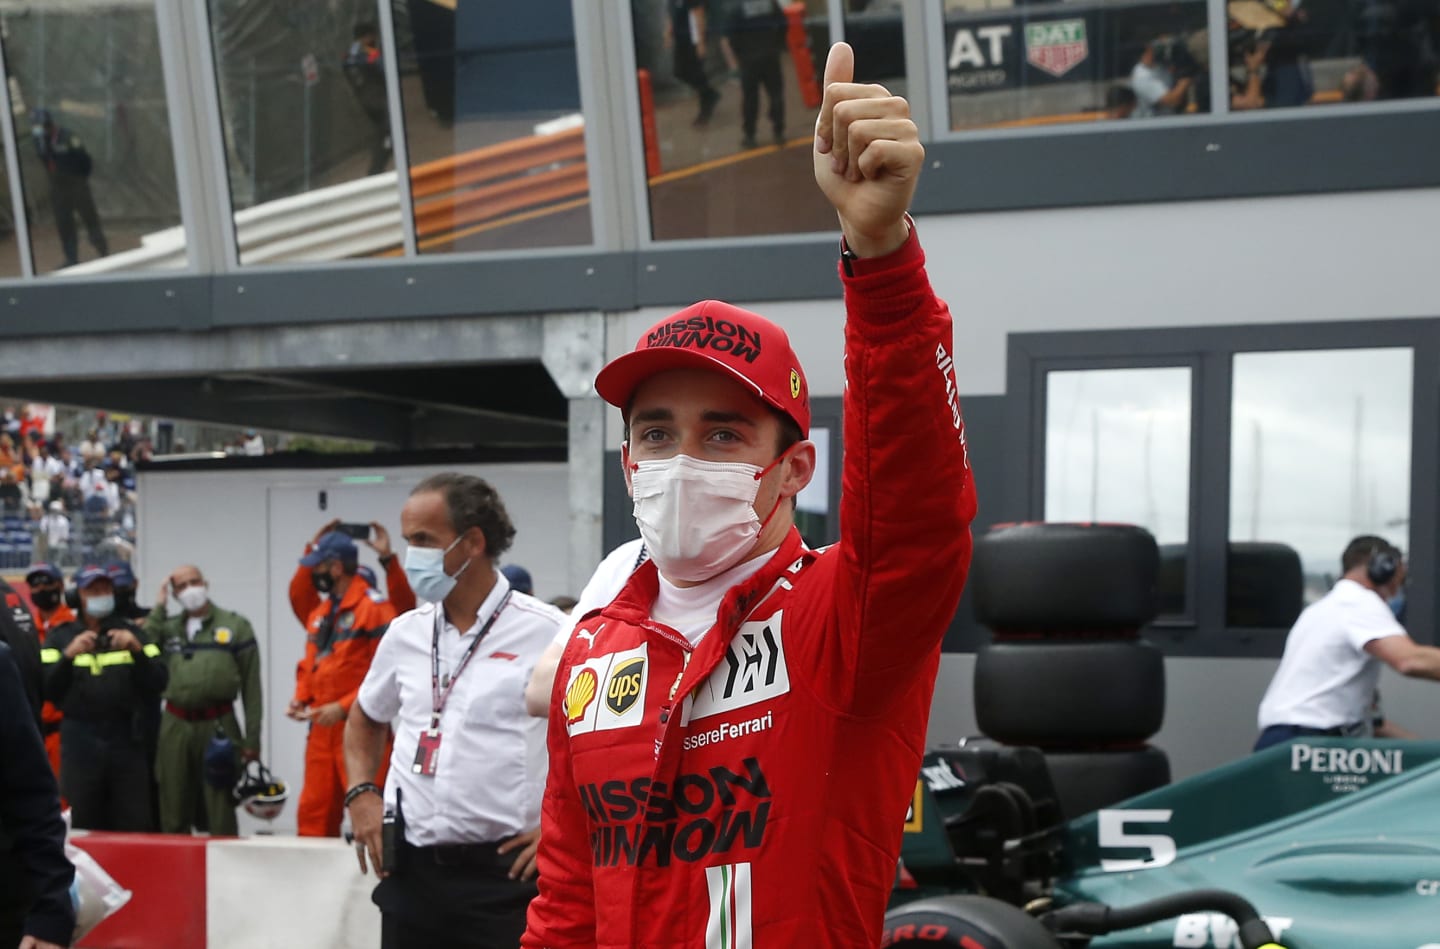 MONTE-CARLO, MONACO - MAY 22: Pole position qualifier Charles Leclerc of Monaco and Ferrari celebrates in parc ferme during qualifying prior to the F1 Grand Prix of Monaco at Circuit de Monaco on May 22, 2021 in Monte-Carlo, Monaco. (Photo by Sebastien Nogier - Pool/Getty Images)